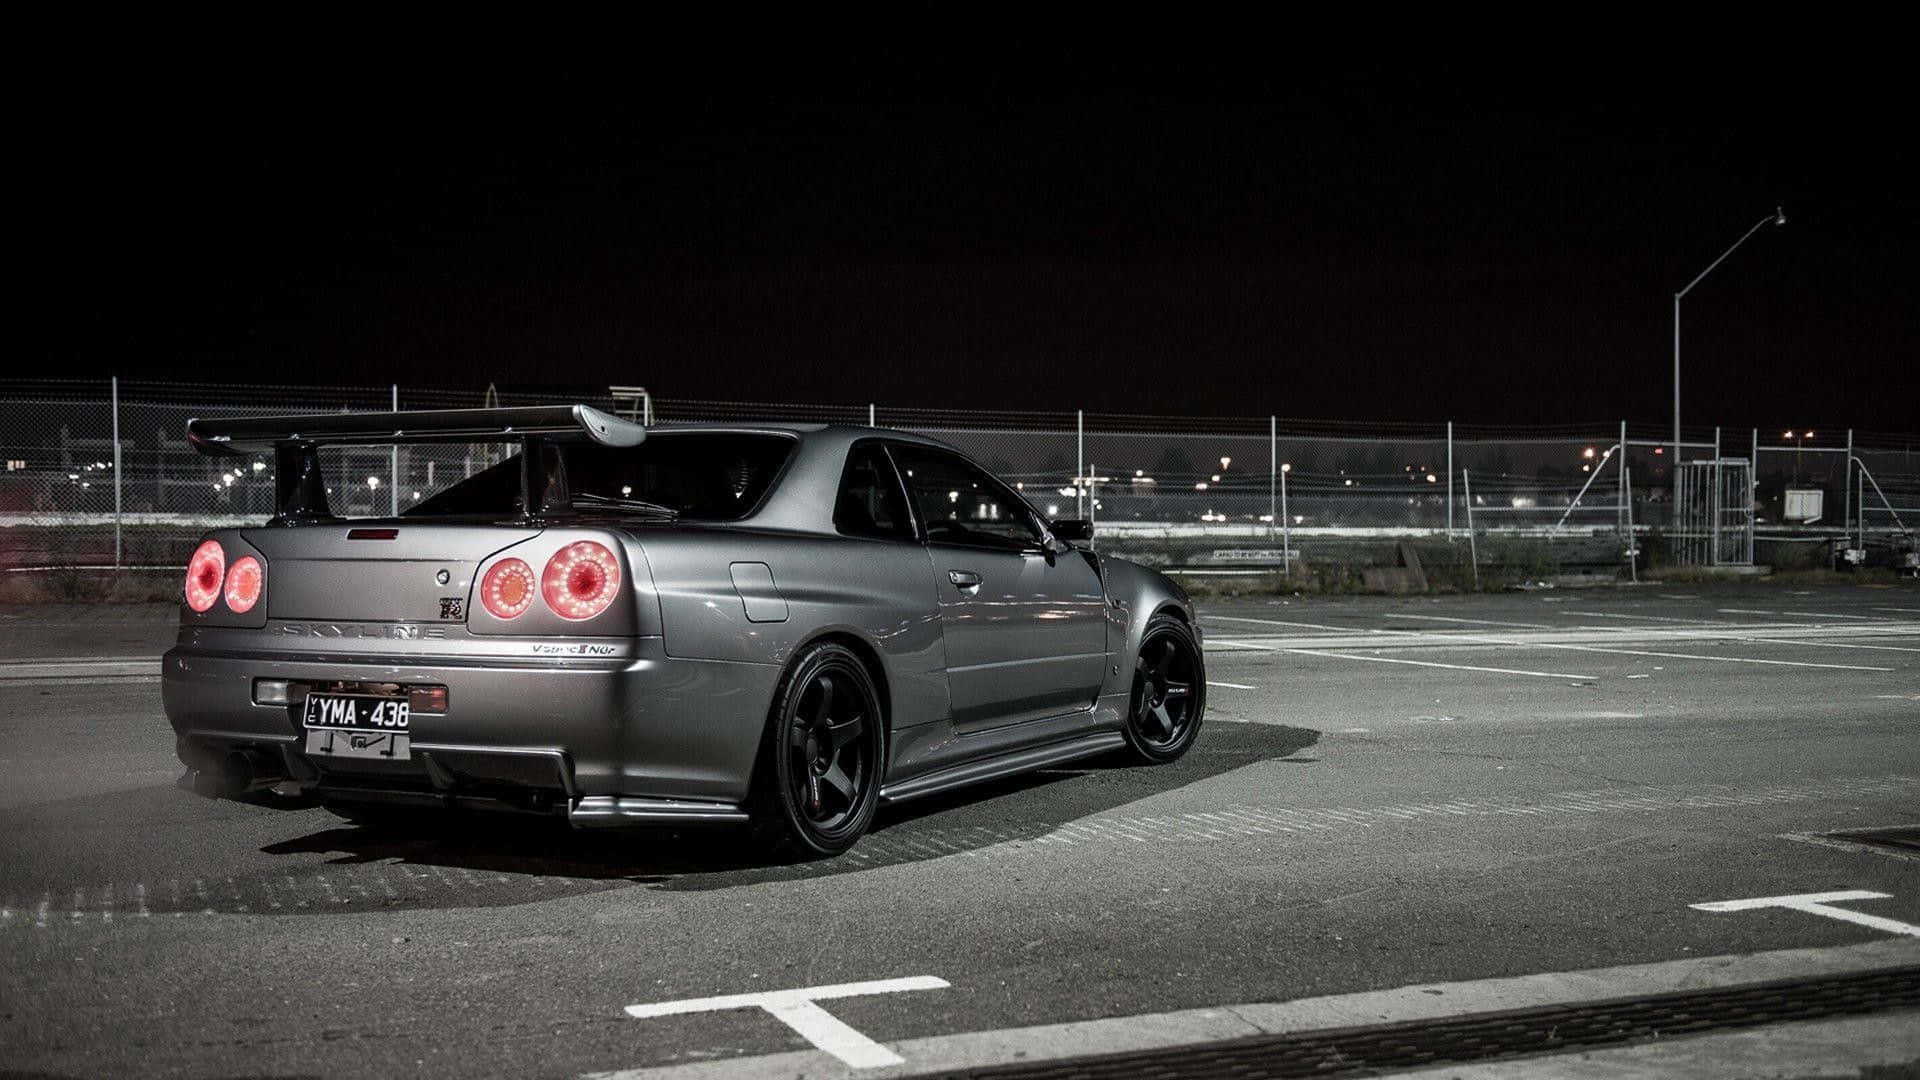 Get Behind The Wheel Of This Sleek And Stylish Cool Gtr Car.